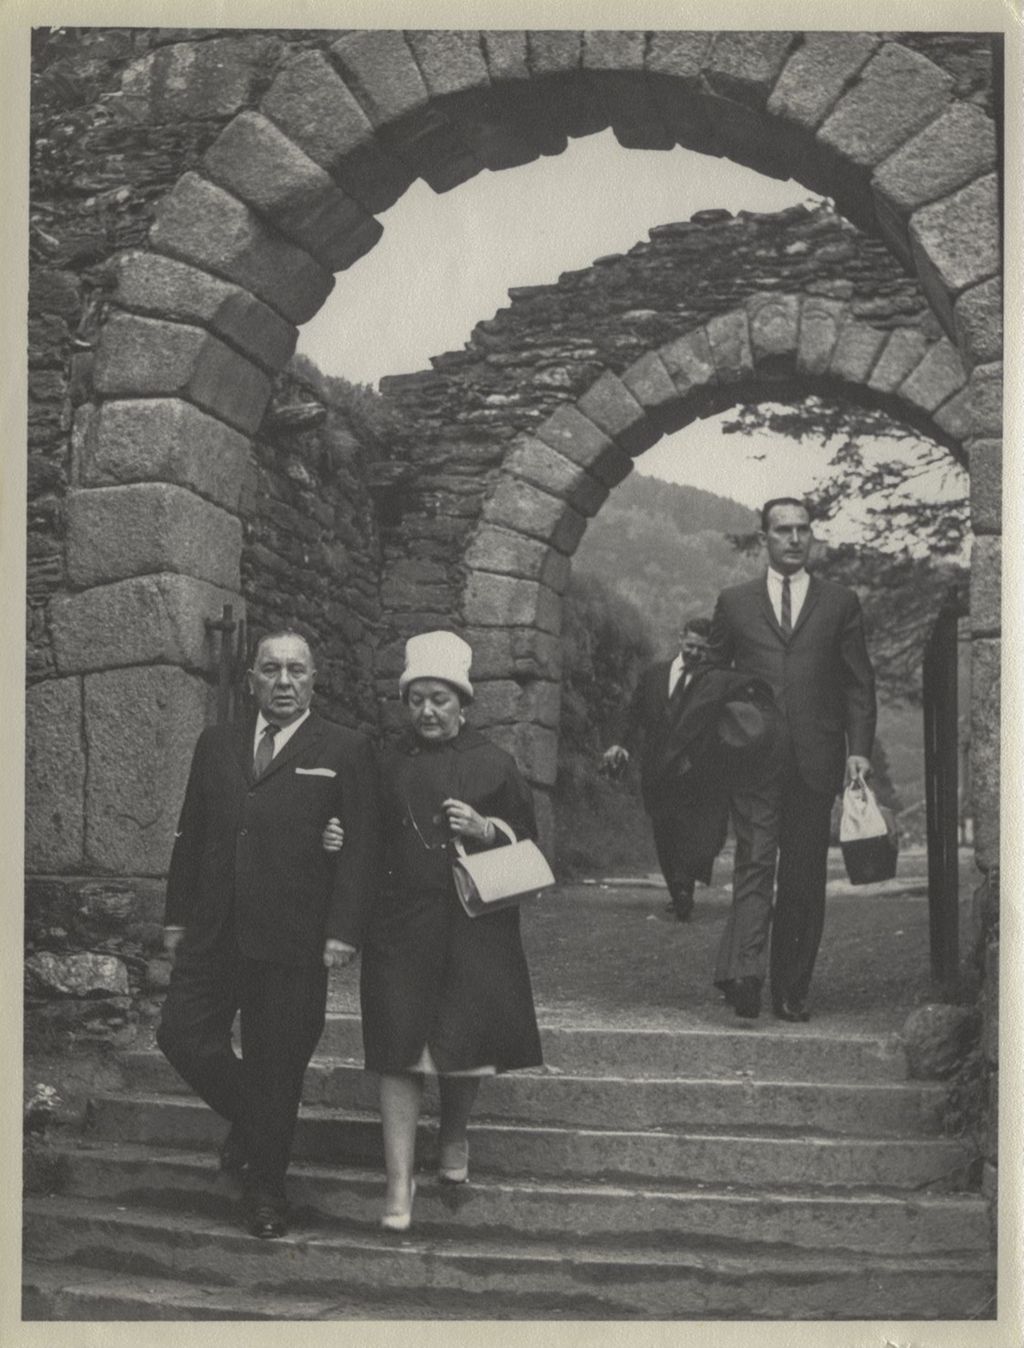 Miniature of Trip to Ireland, Richard J. and Eleanor Daley touring ruins of a stone building